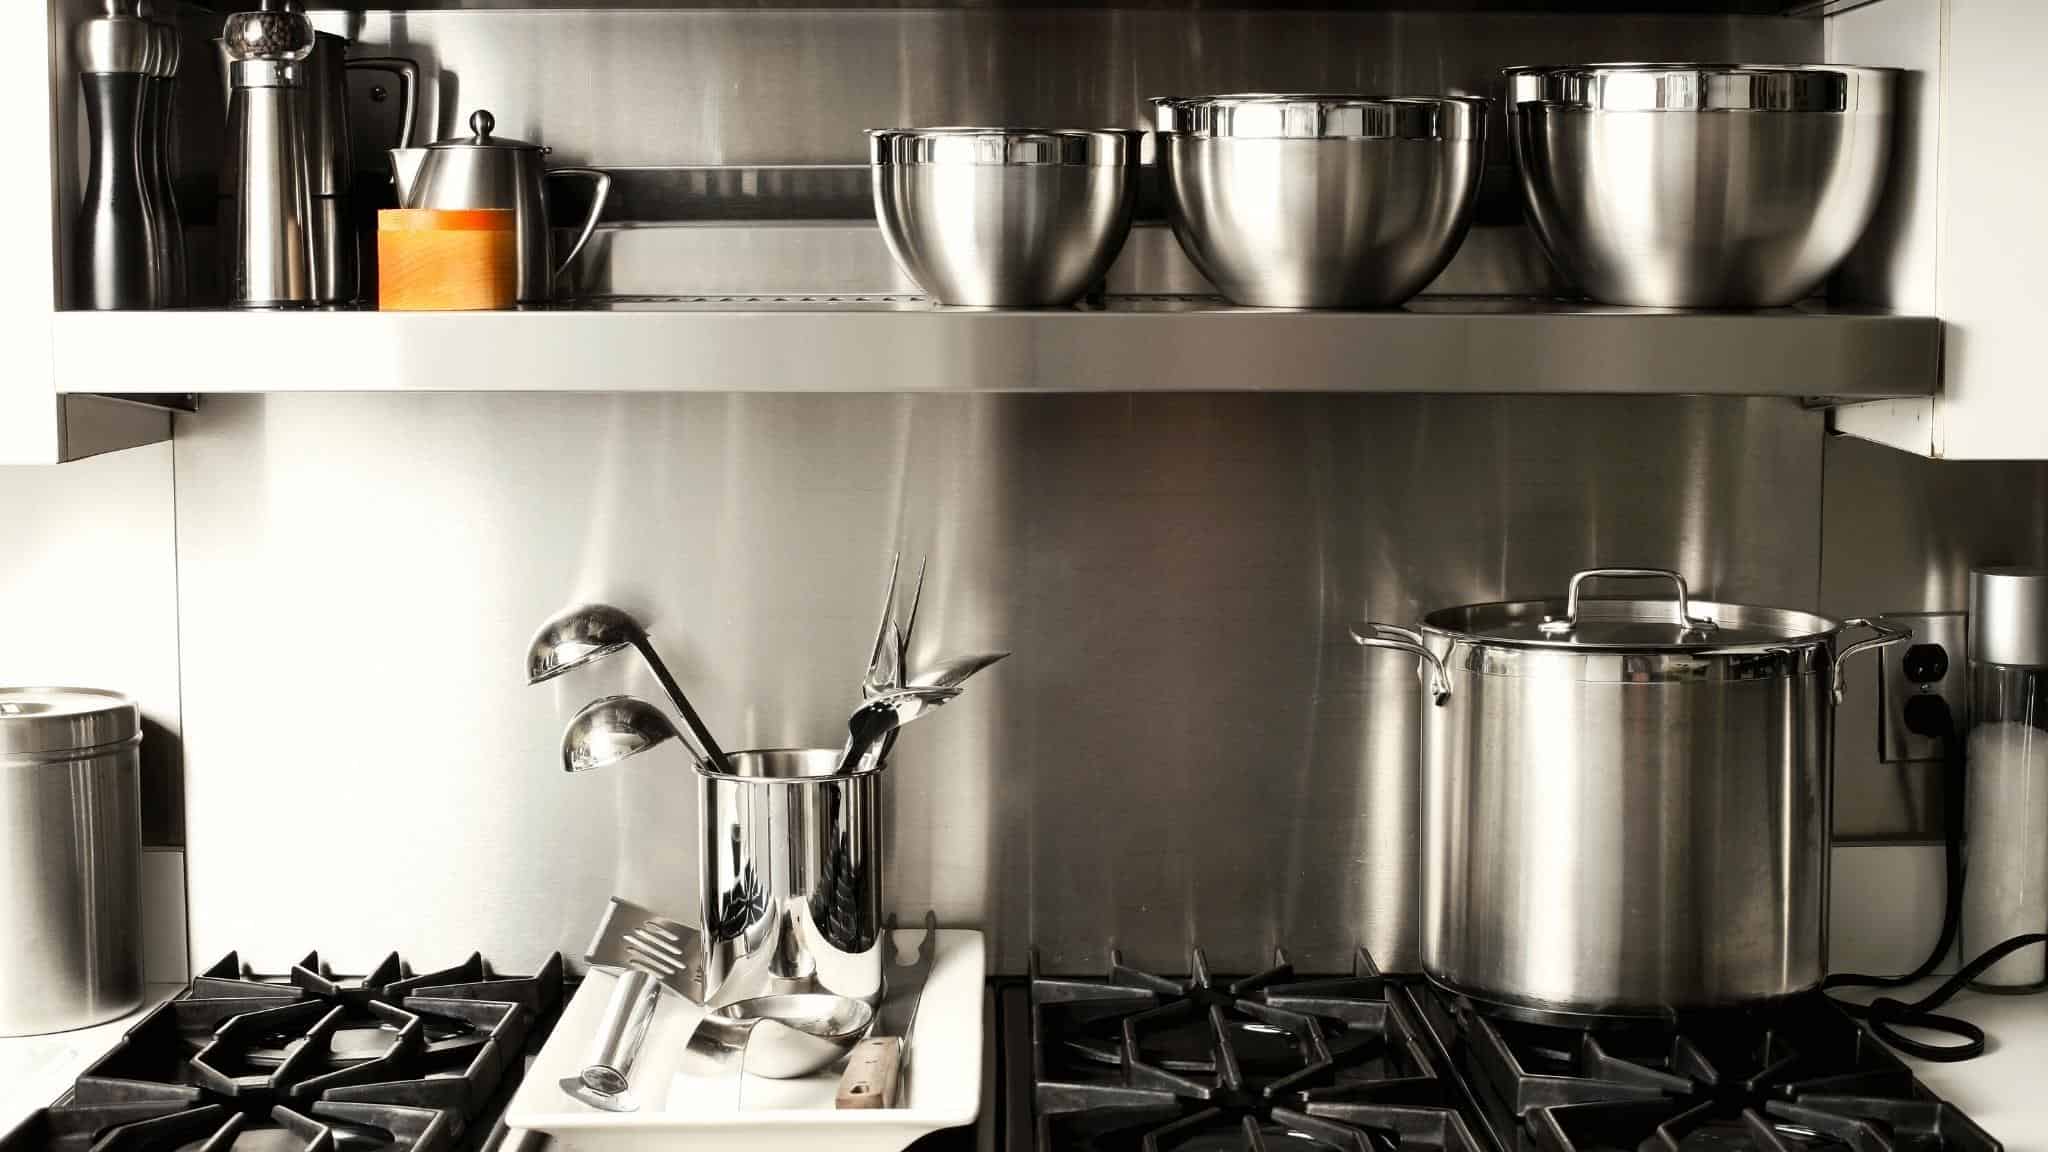 Types of kitchen tools and equipment